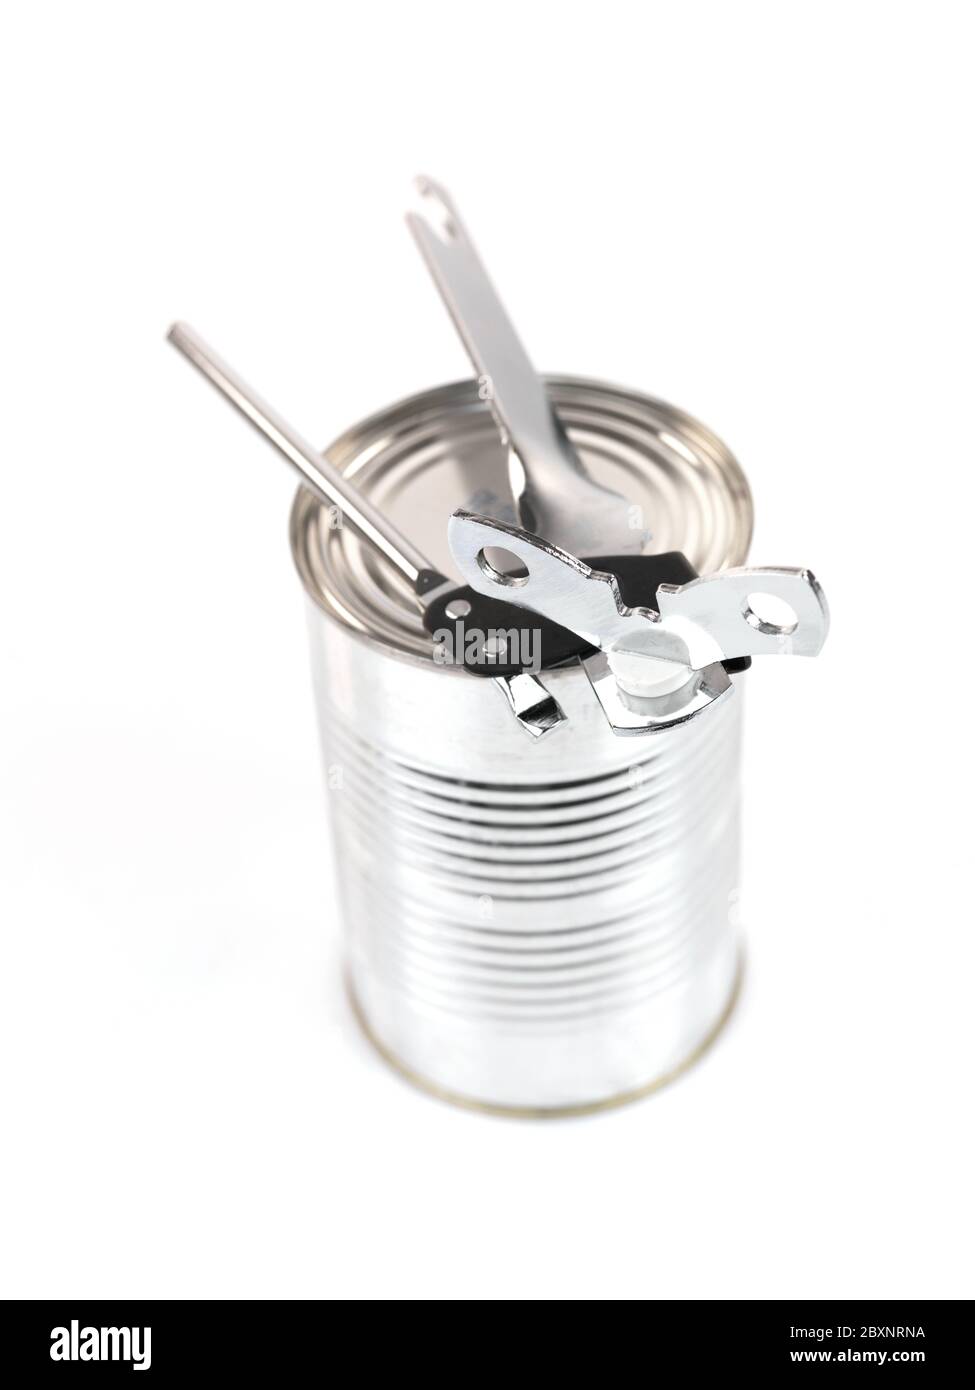 https://c8.alamy.com/comp/2BXNRNA/a-can-opener-and-a-tin-can-isolated-against-a-white-background-2BXNRNA.jpg